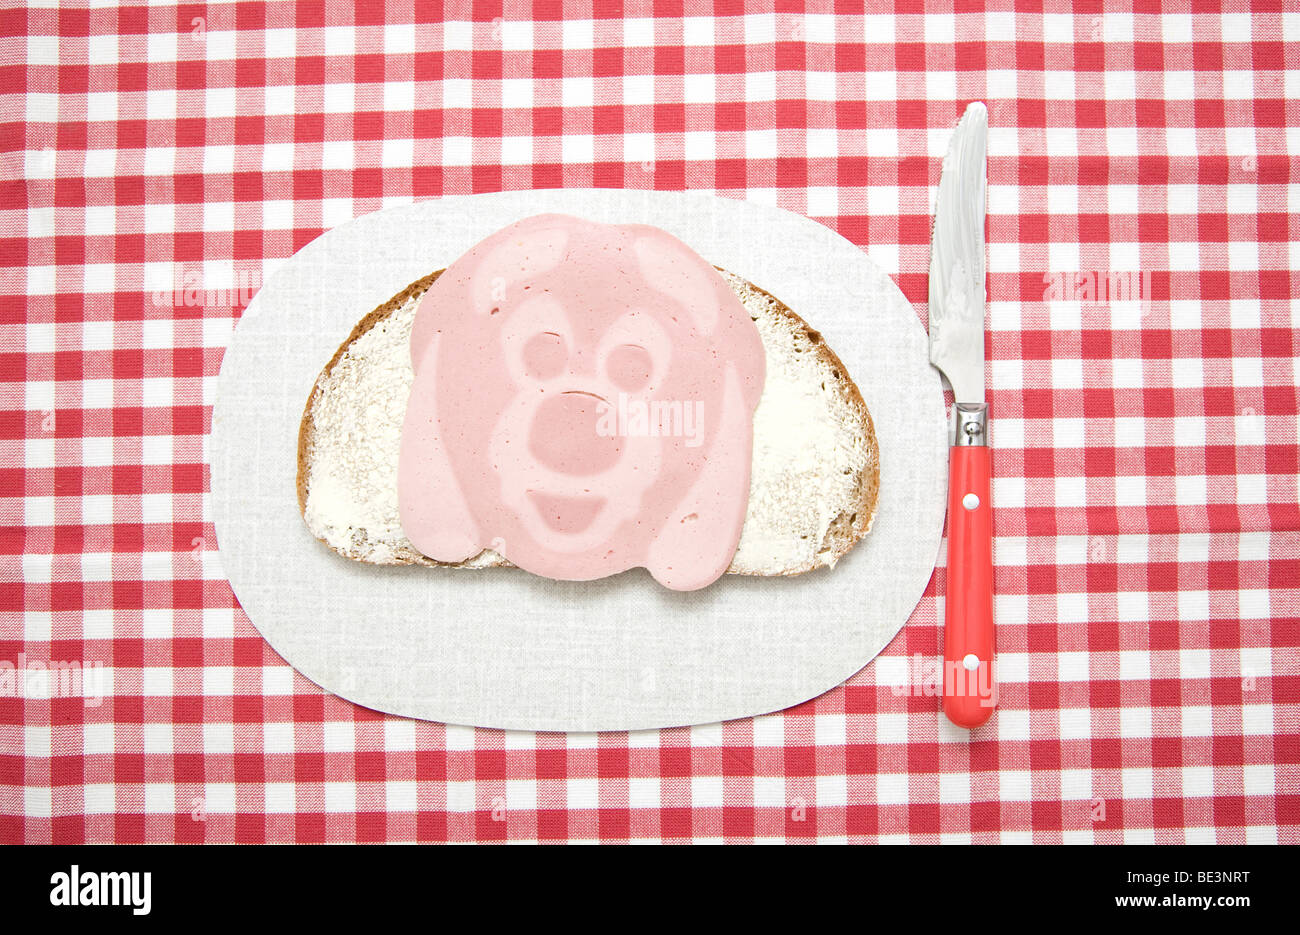 Sandwich with sausage in the form of a face, a dog's head on board with knife Stock Photo